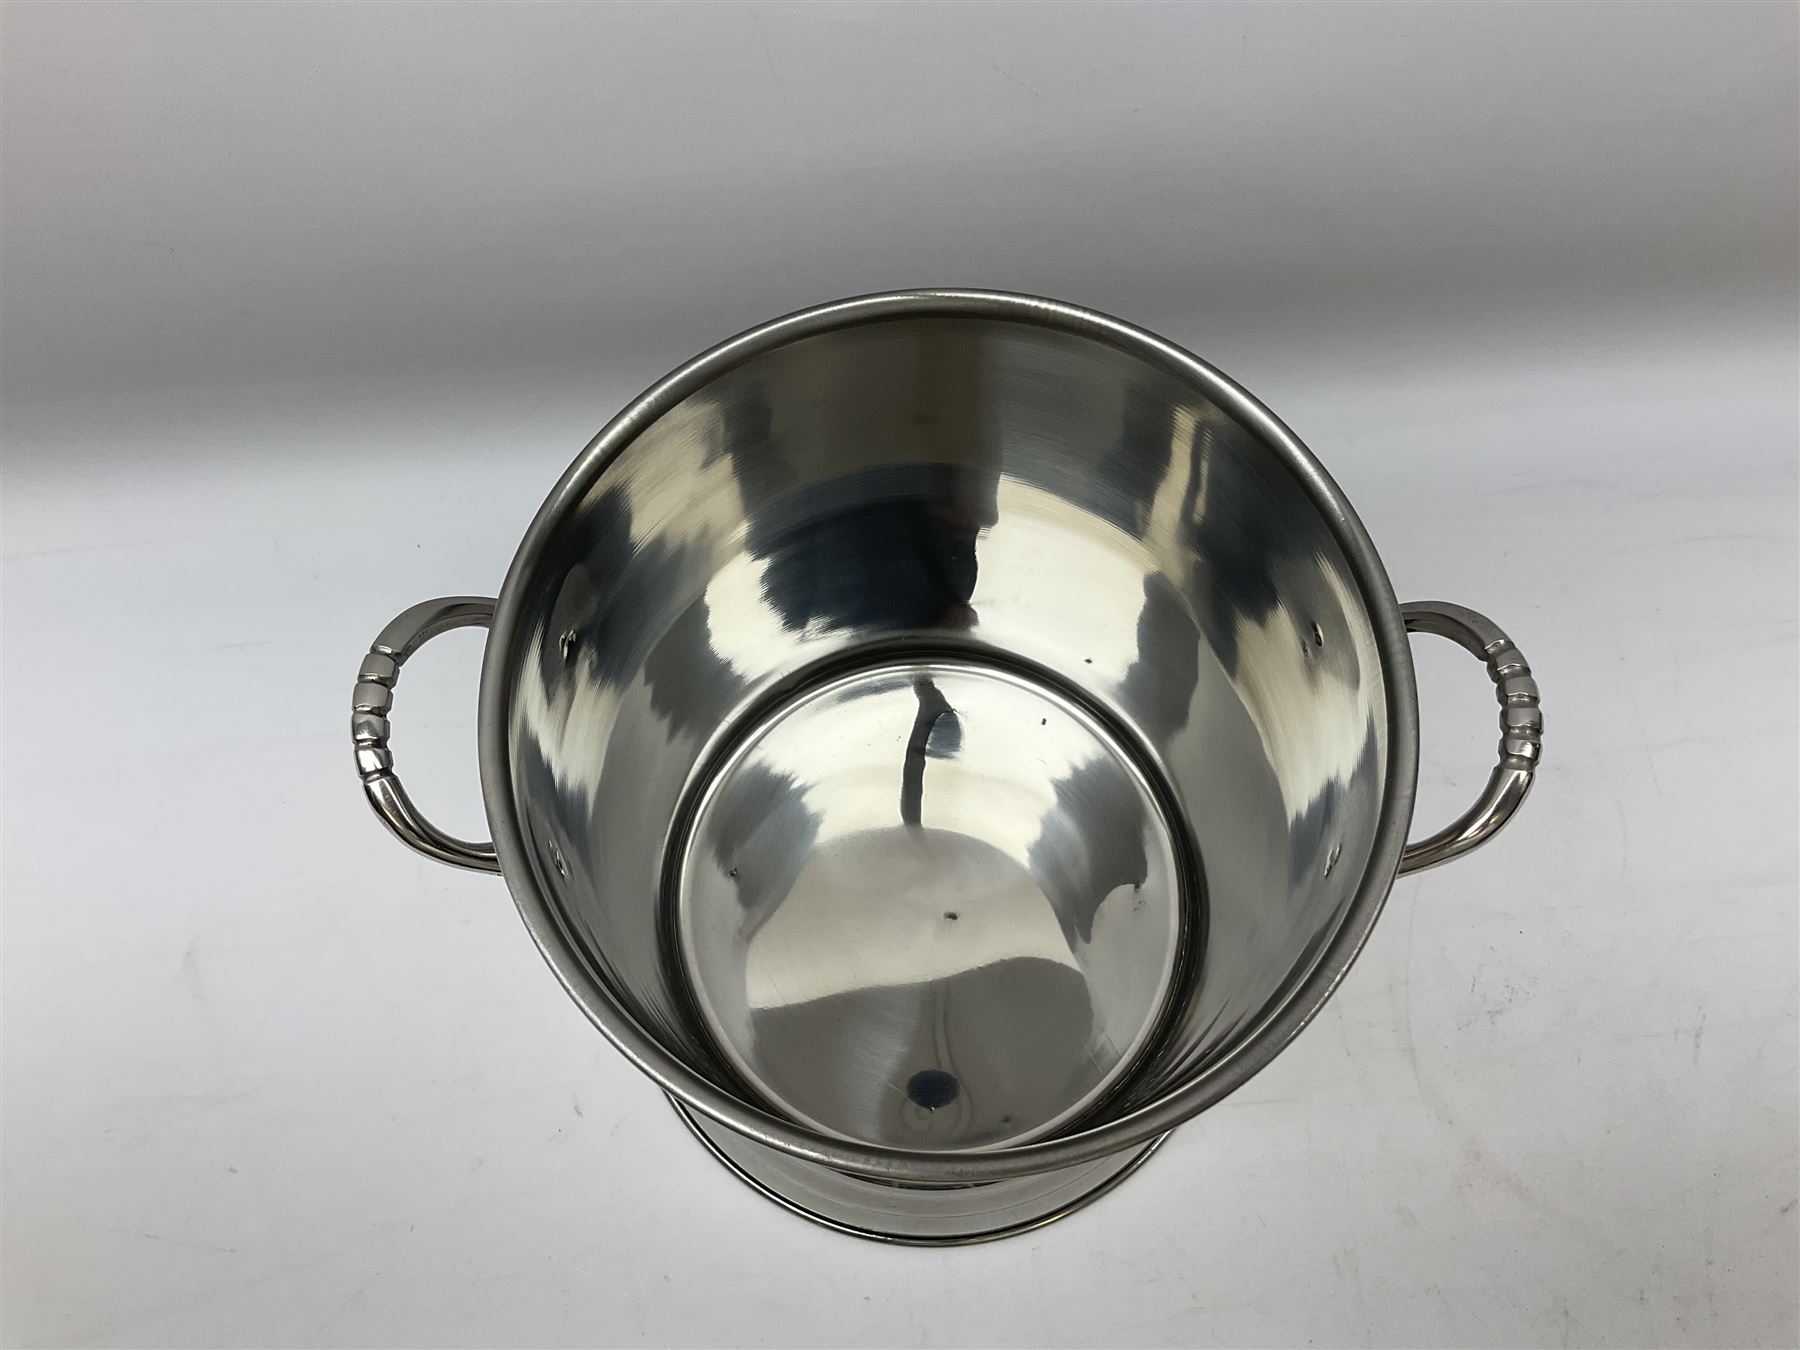 Lois Roederer champagne bucket of cylindrical form with twin handles - Image 3 of 6